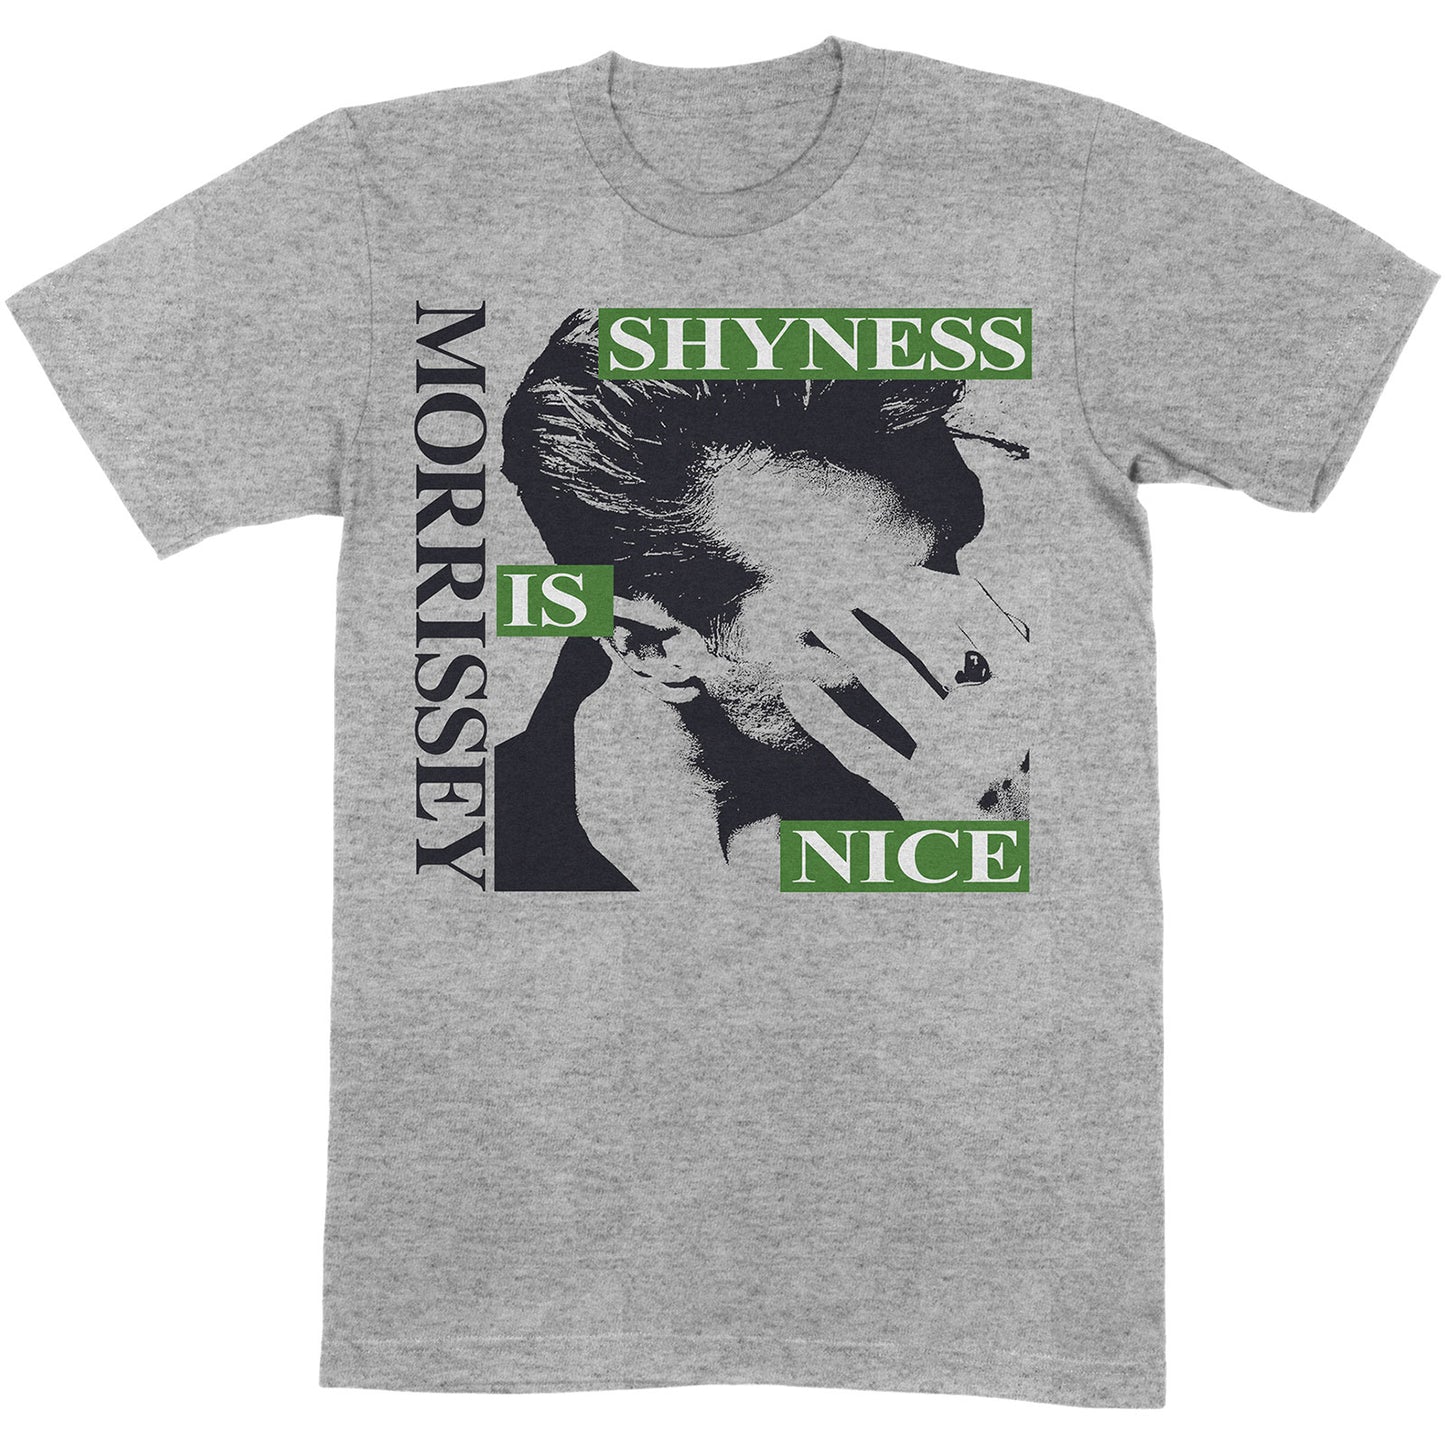 Morrissey T-Shirt: Shyness Is Nice